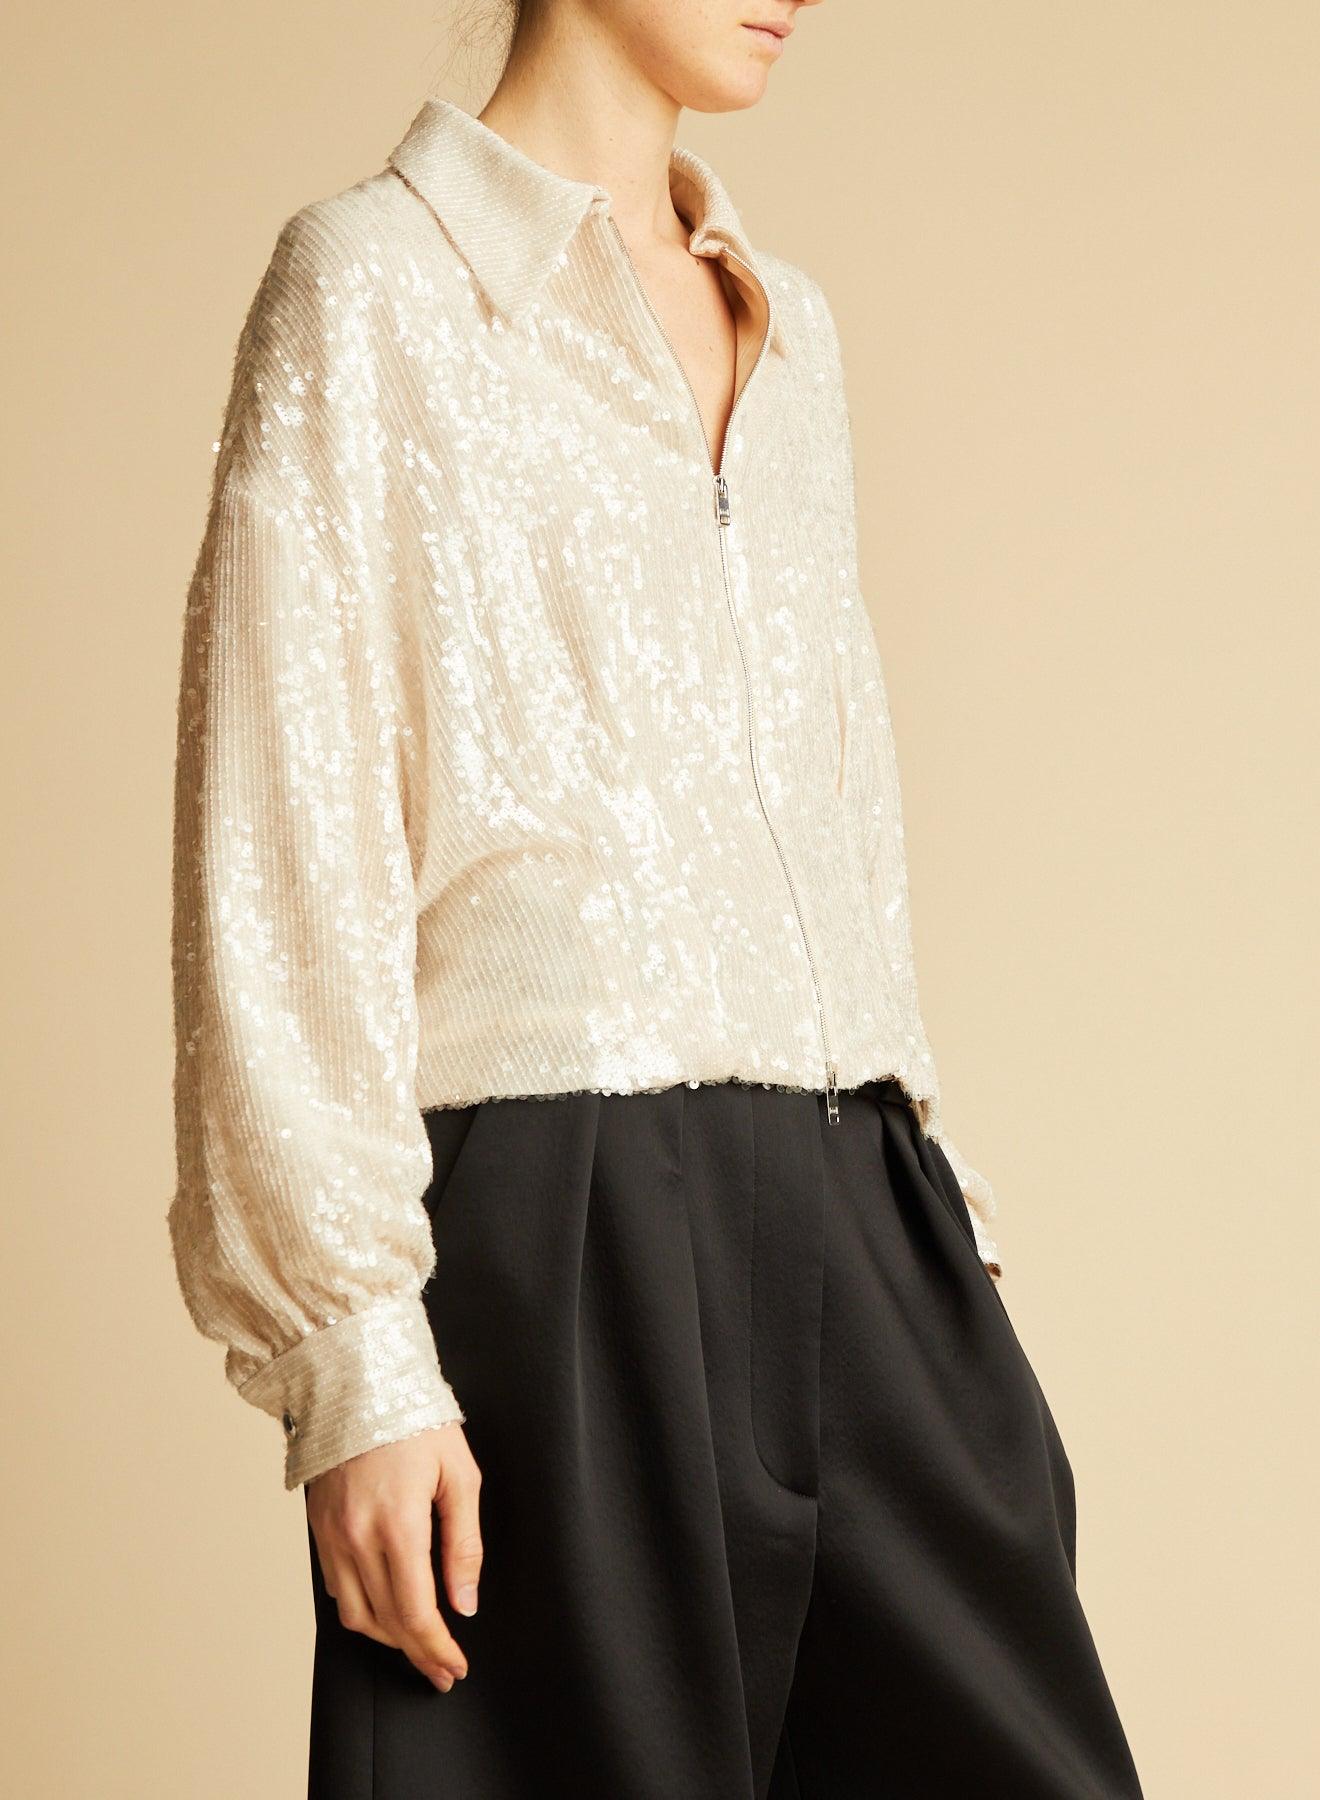 The Arnaud Jacket in Beige Sequin - The Iconic Issue